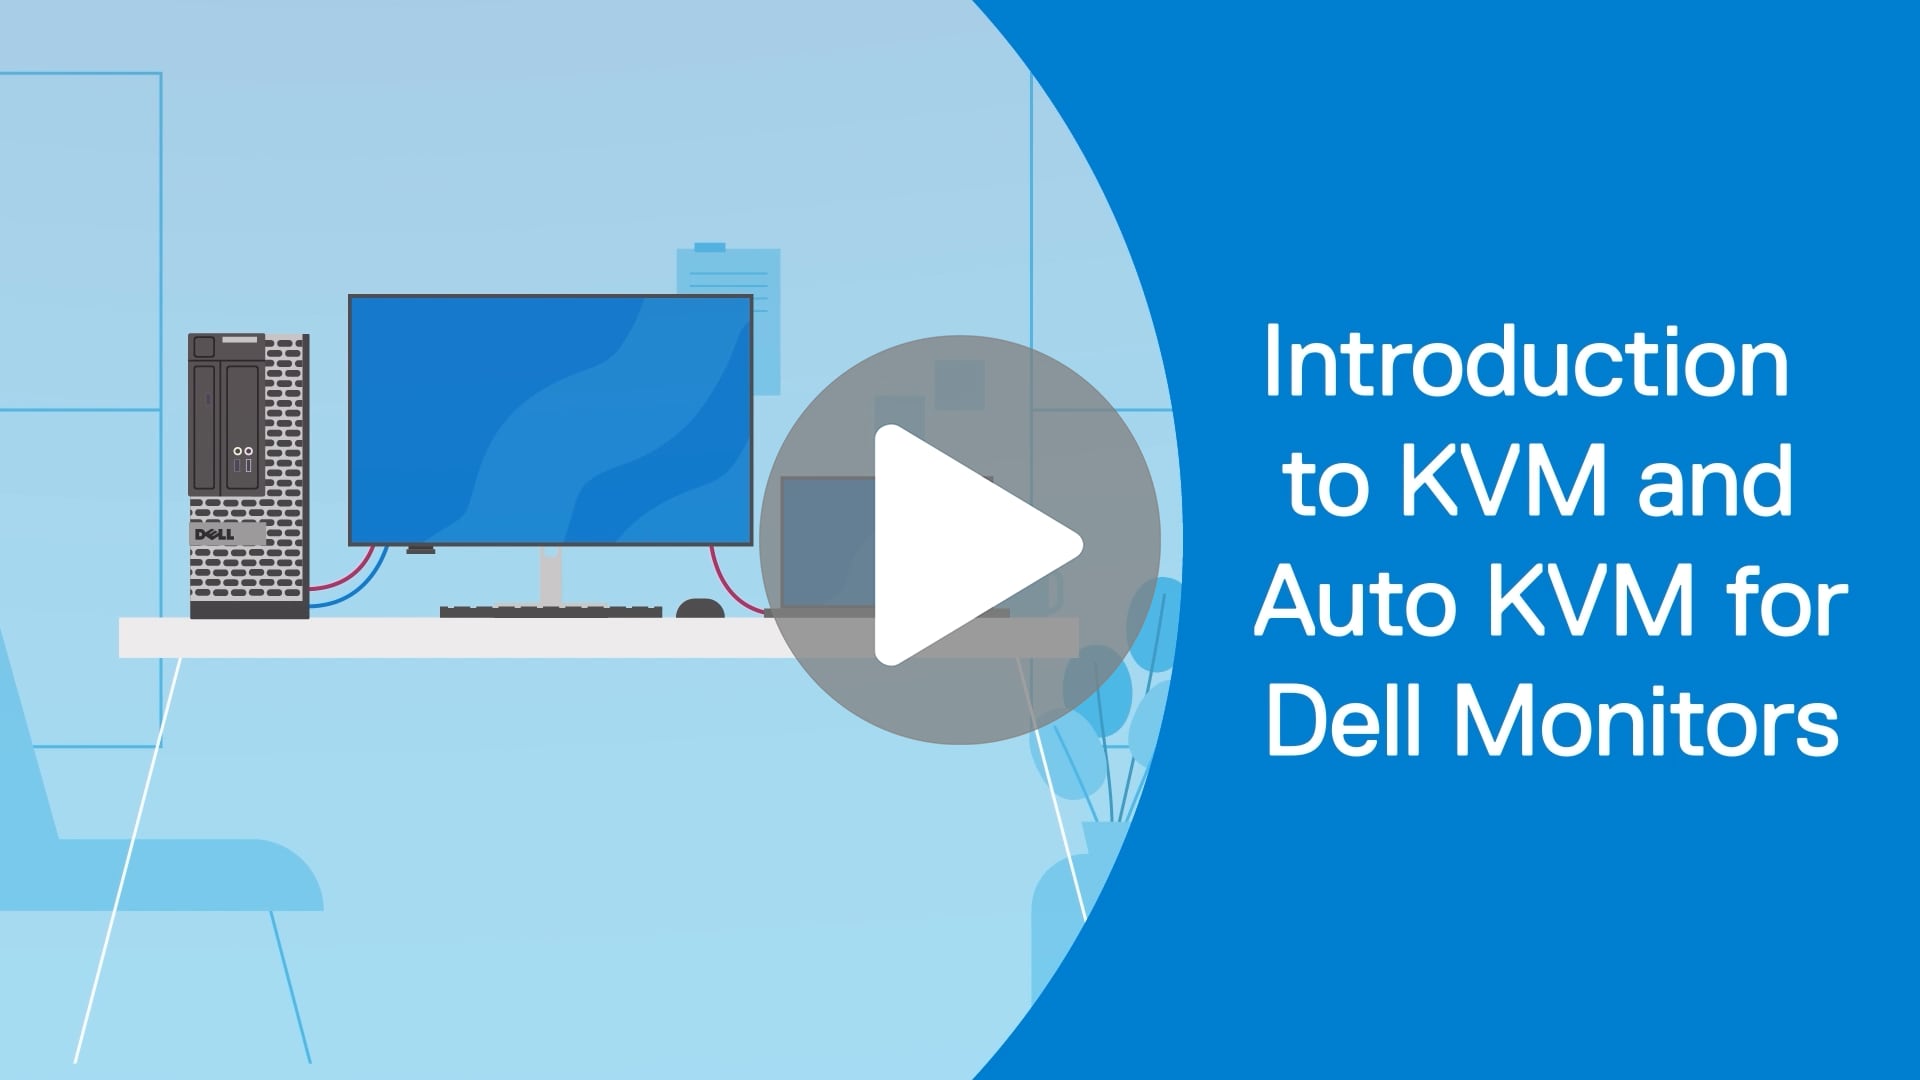 Watch this video to learn about KVM and Auto KVM for Dell monitors.